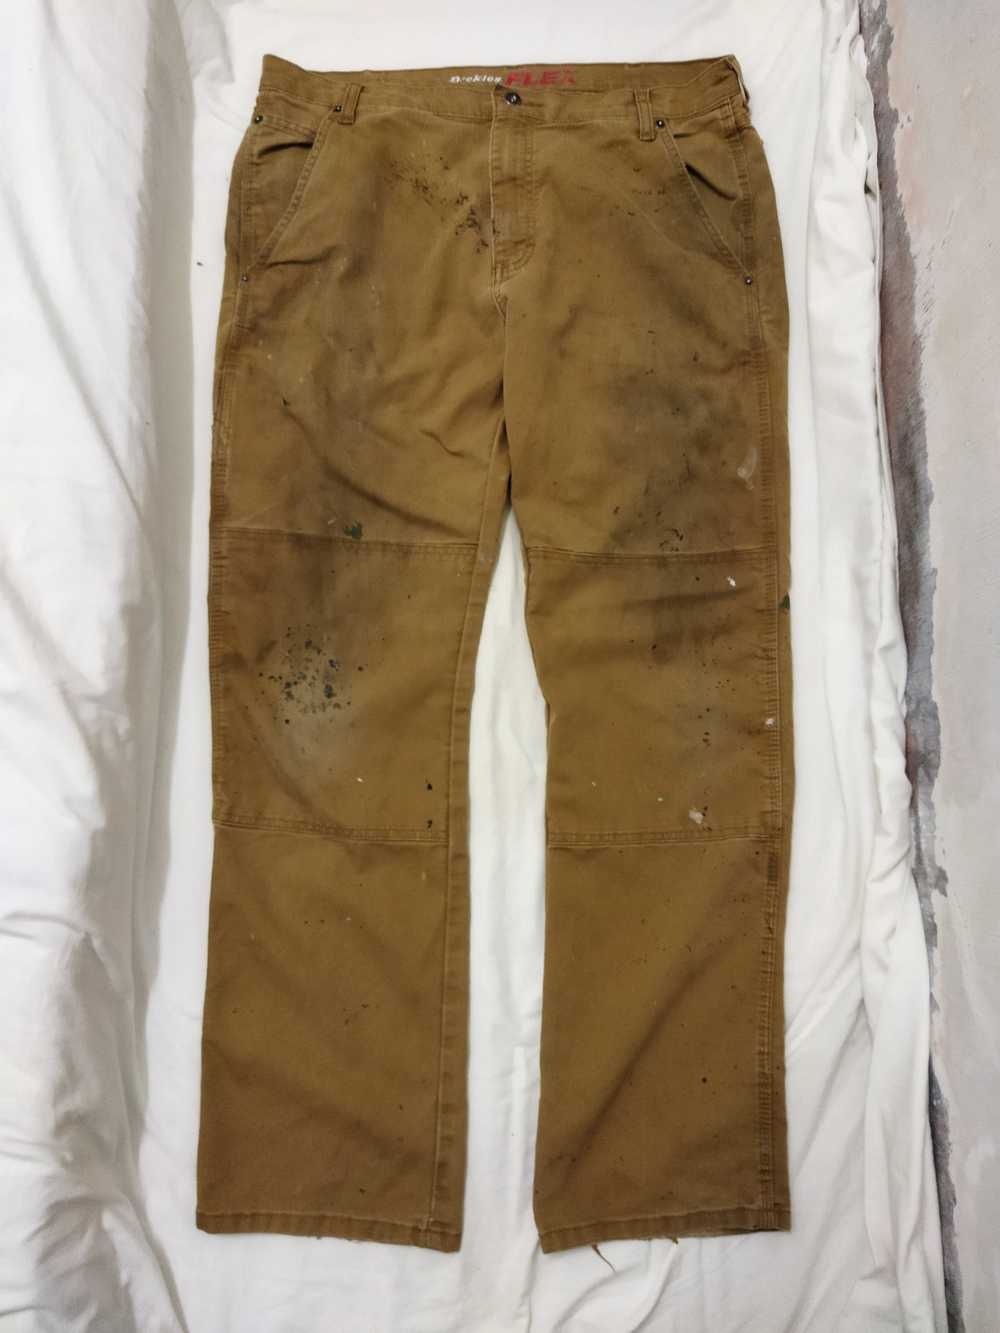 Relaxed Fit Double Knee Carpenter Painter's Pants